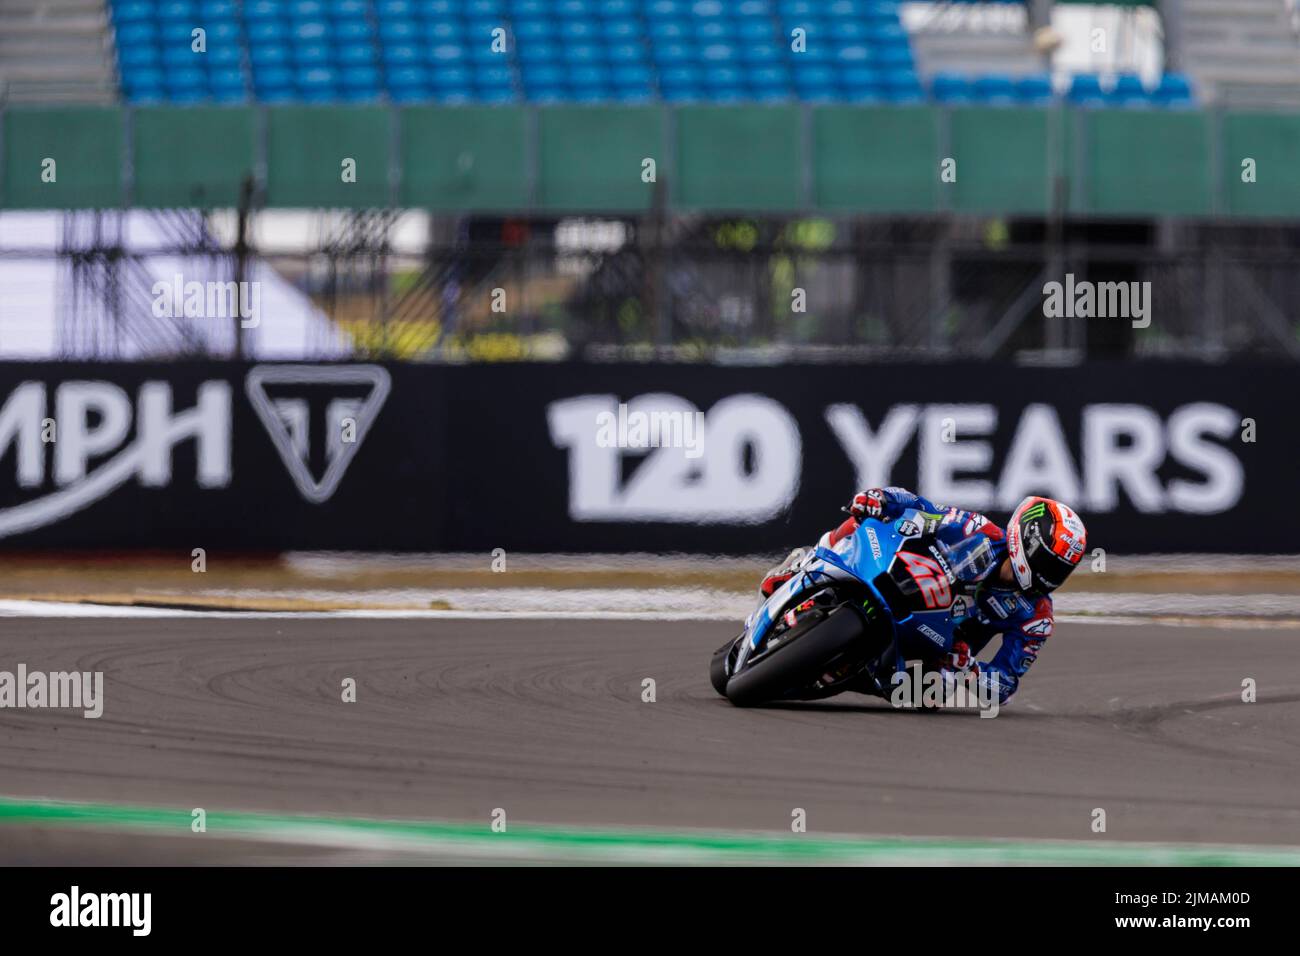 Silverstone, UK. 5th August 2022;  Silverstone Circuit, Silverstone, Northamptonshire, England: British MotoGP Grand Prix, Free Practice: Number 42 Team Suzuki Ecstar bike ridden by Alex Rins during free practice 2 at the British MotoGP Credit: Action Plus Sports Images/Alamy Live News Stock Photo